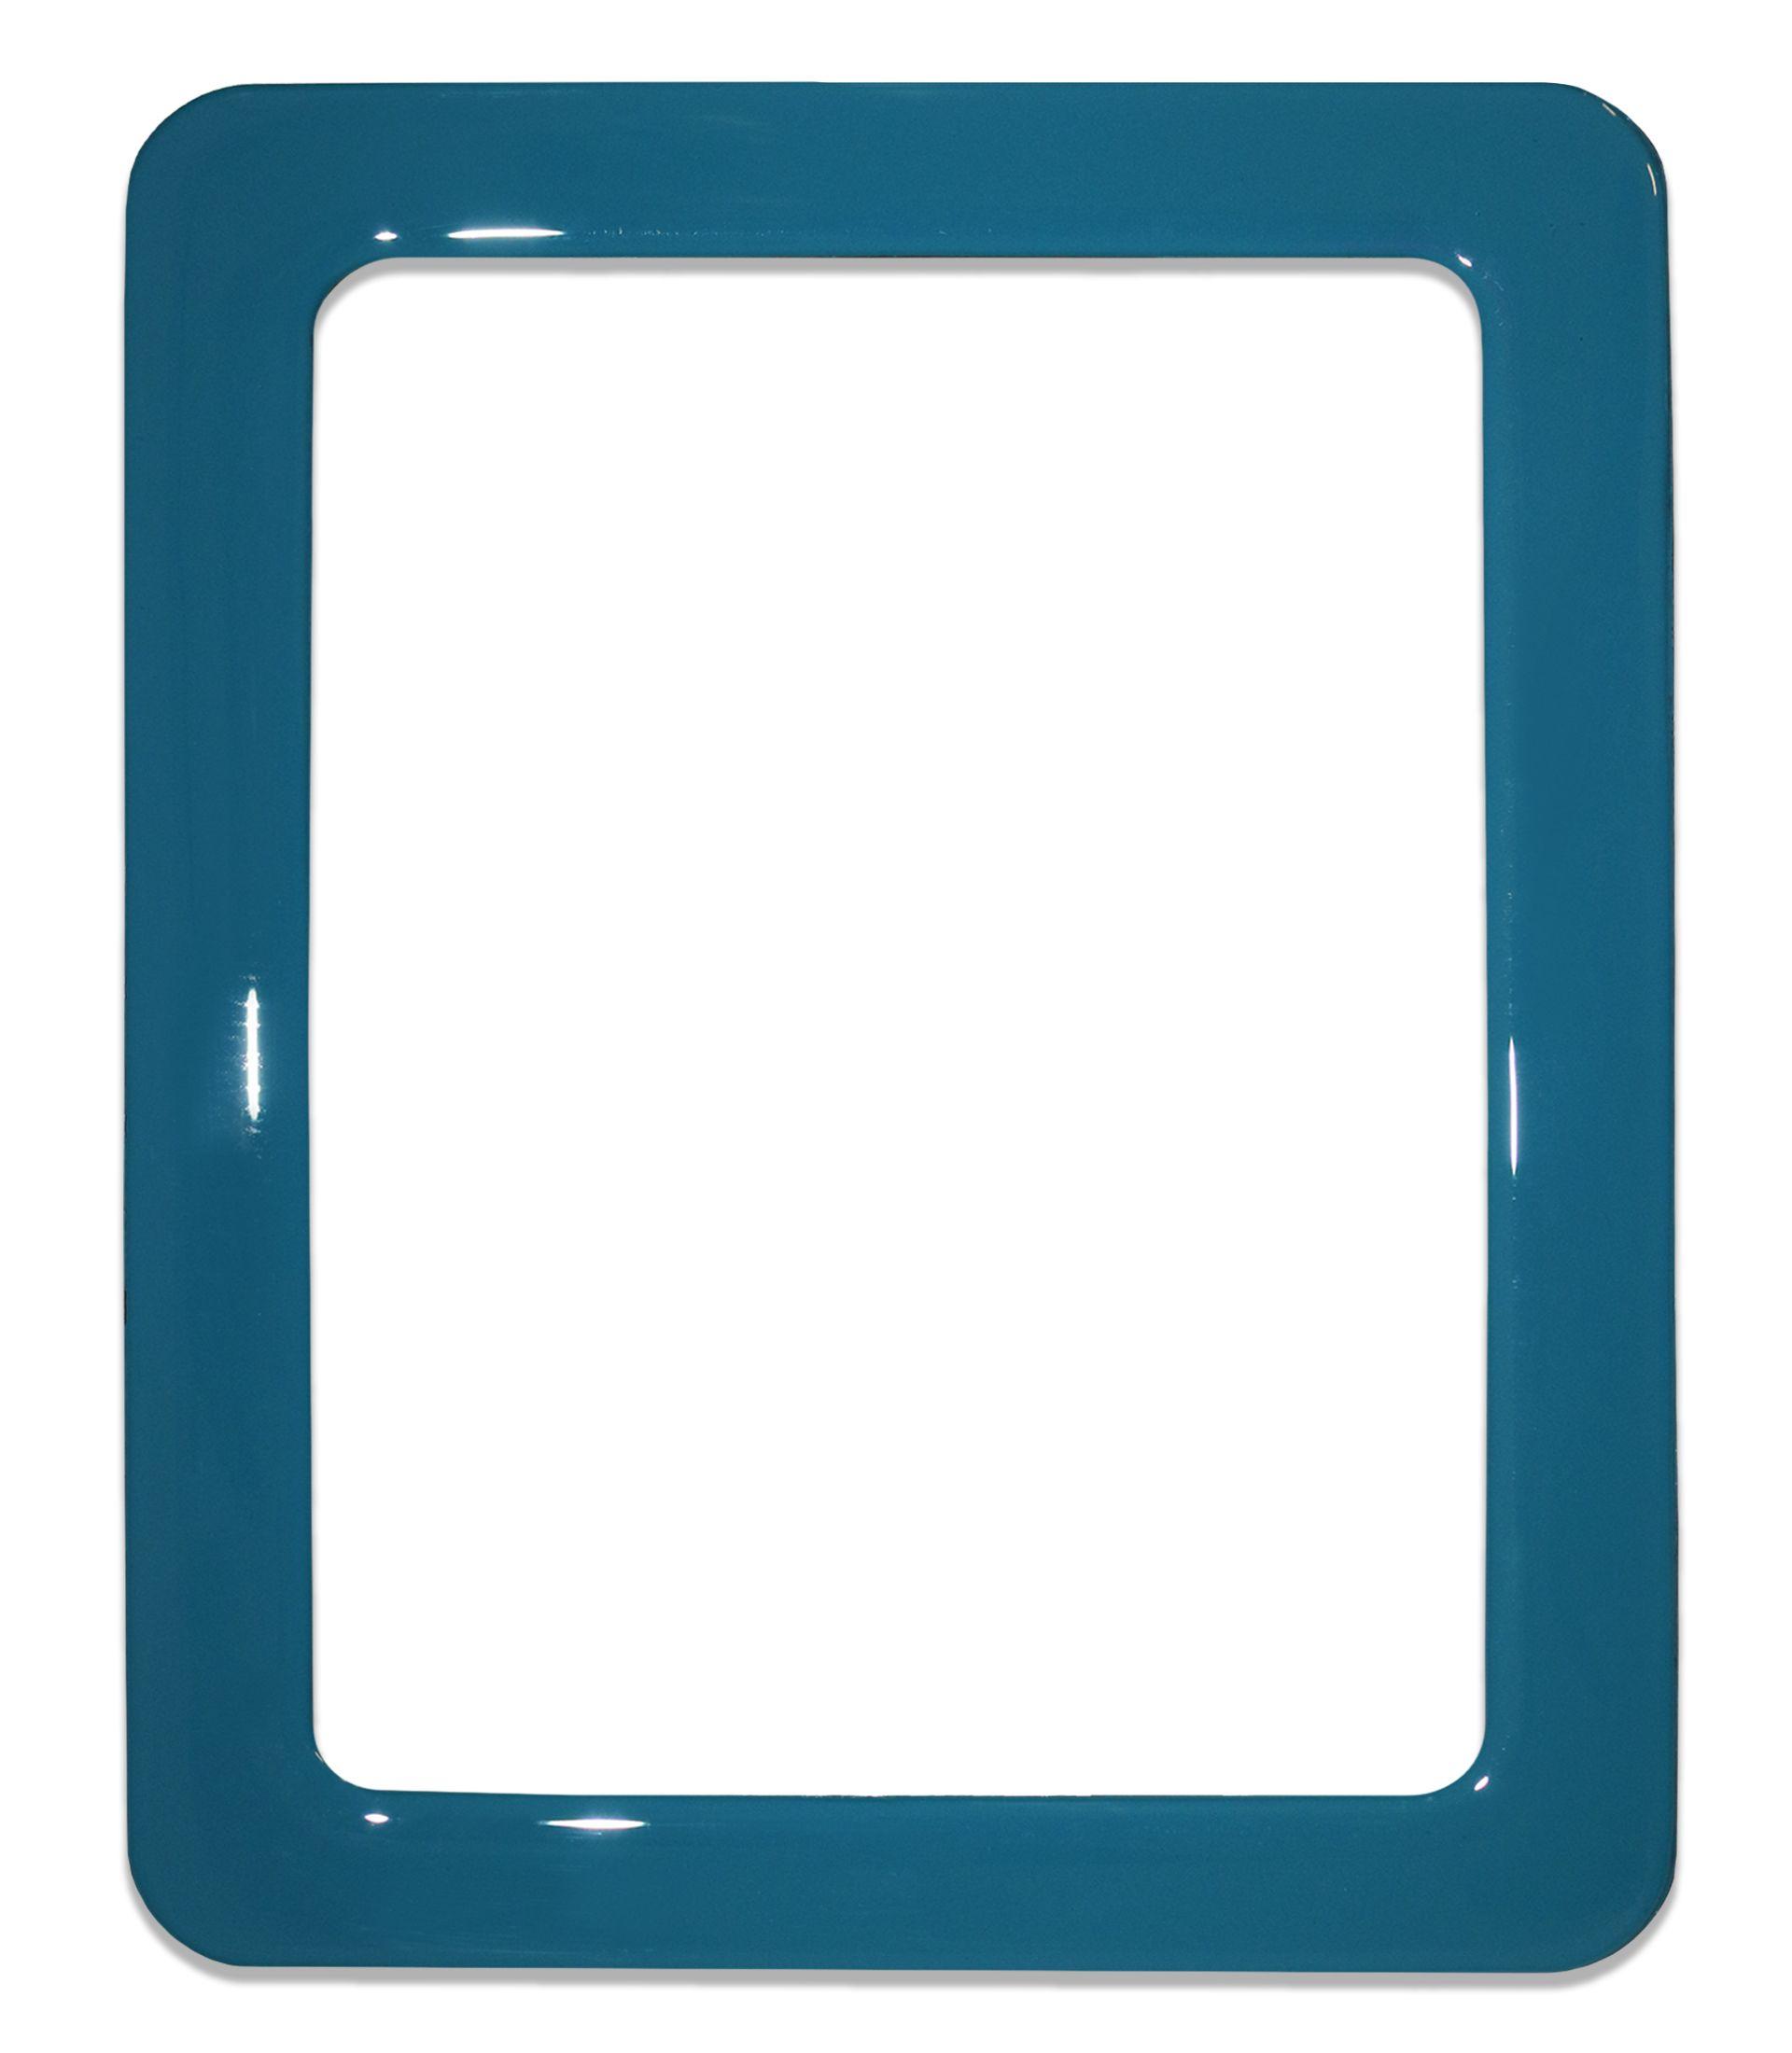 Magnetic self-adhesive frame size 19.0 x 23.8 cm - turquoise